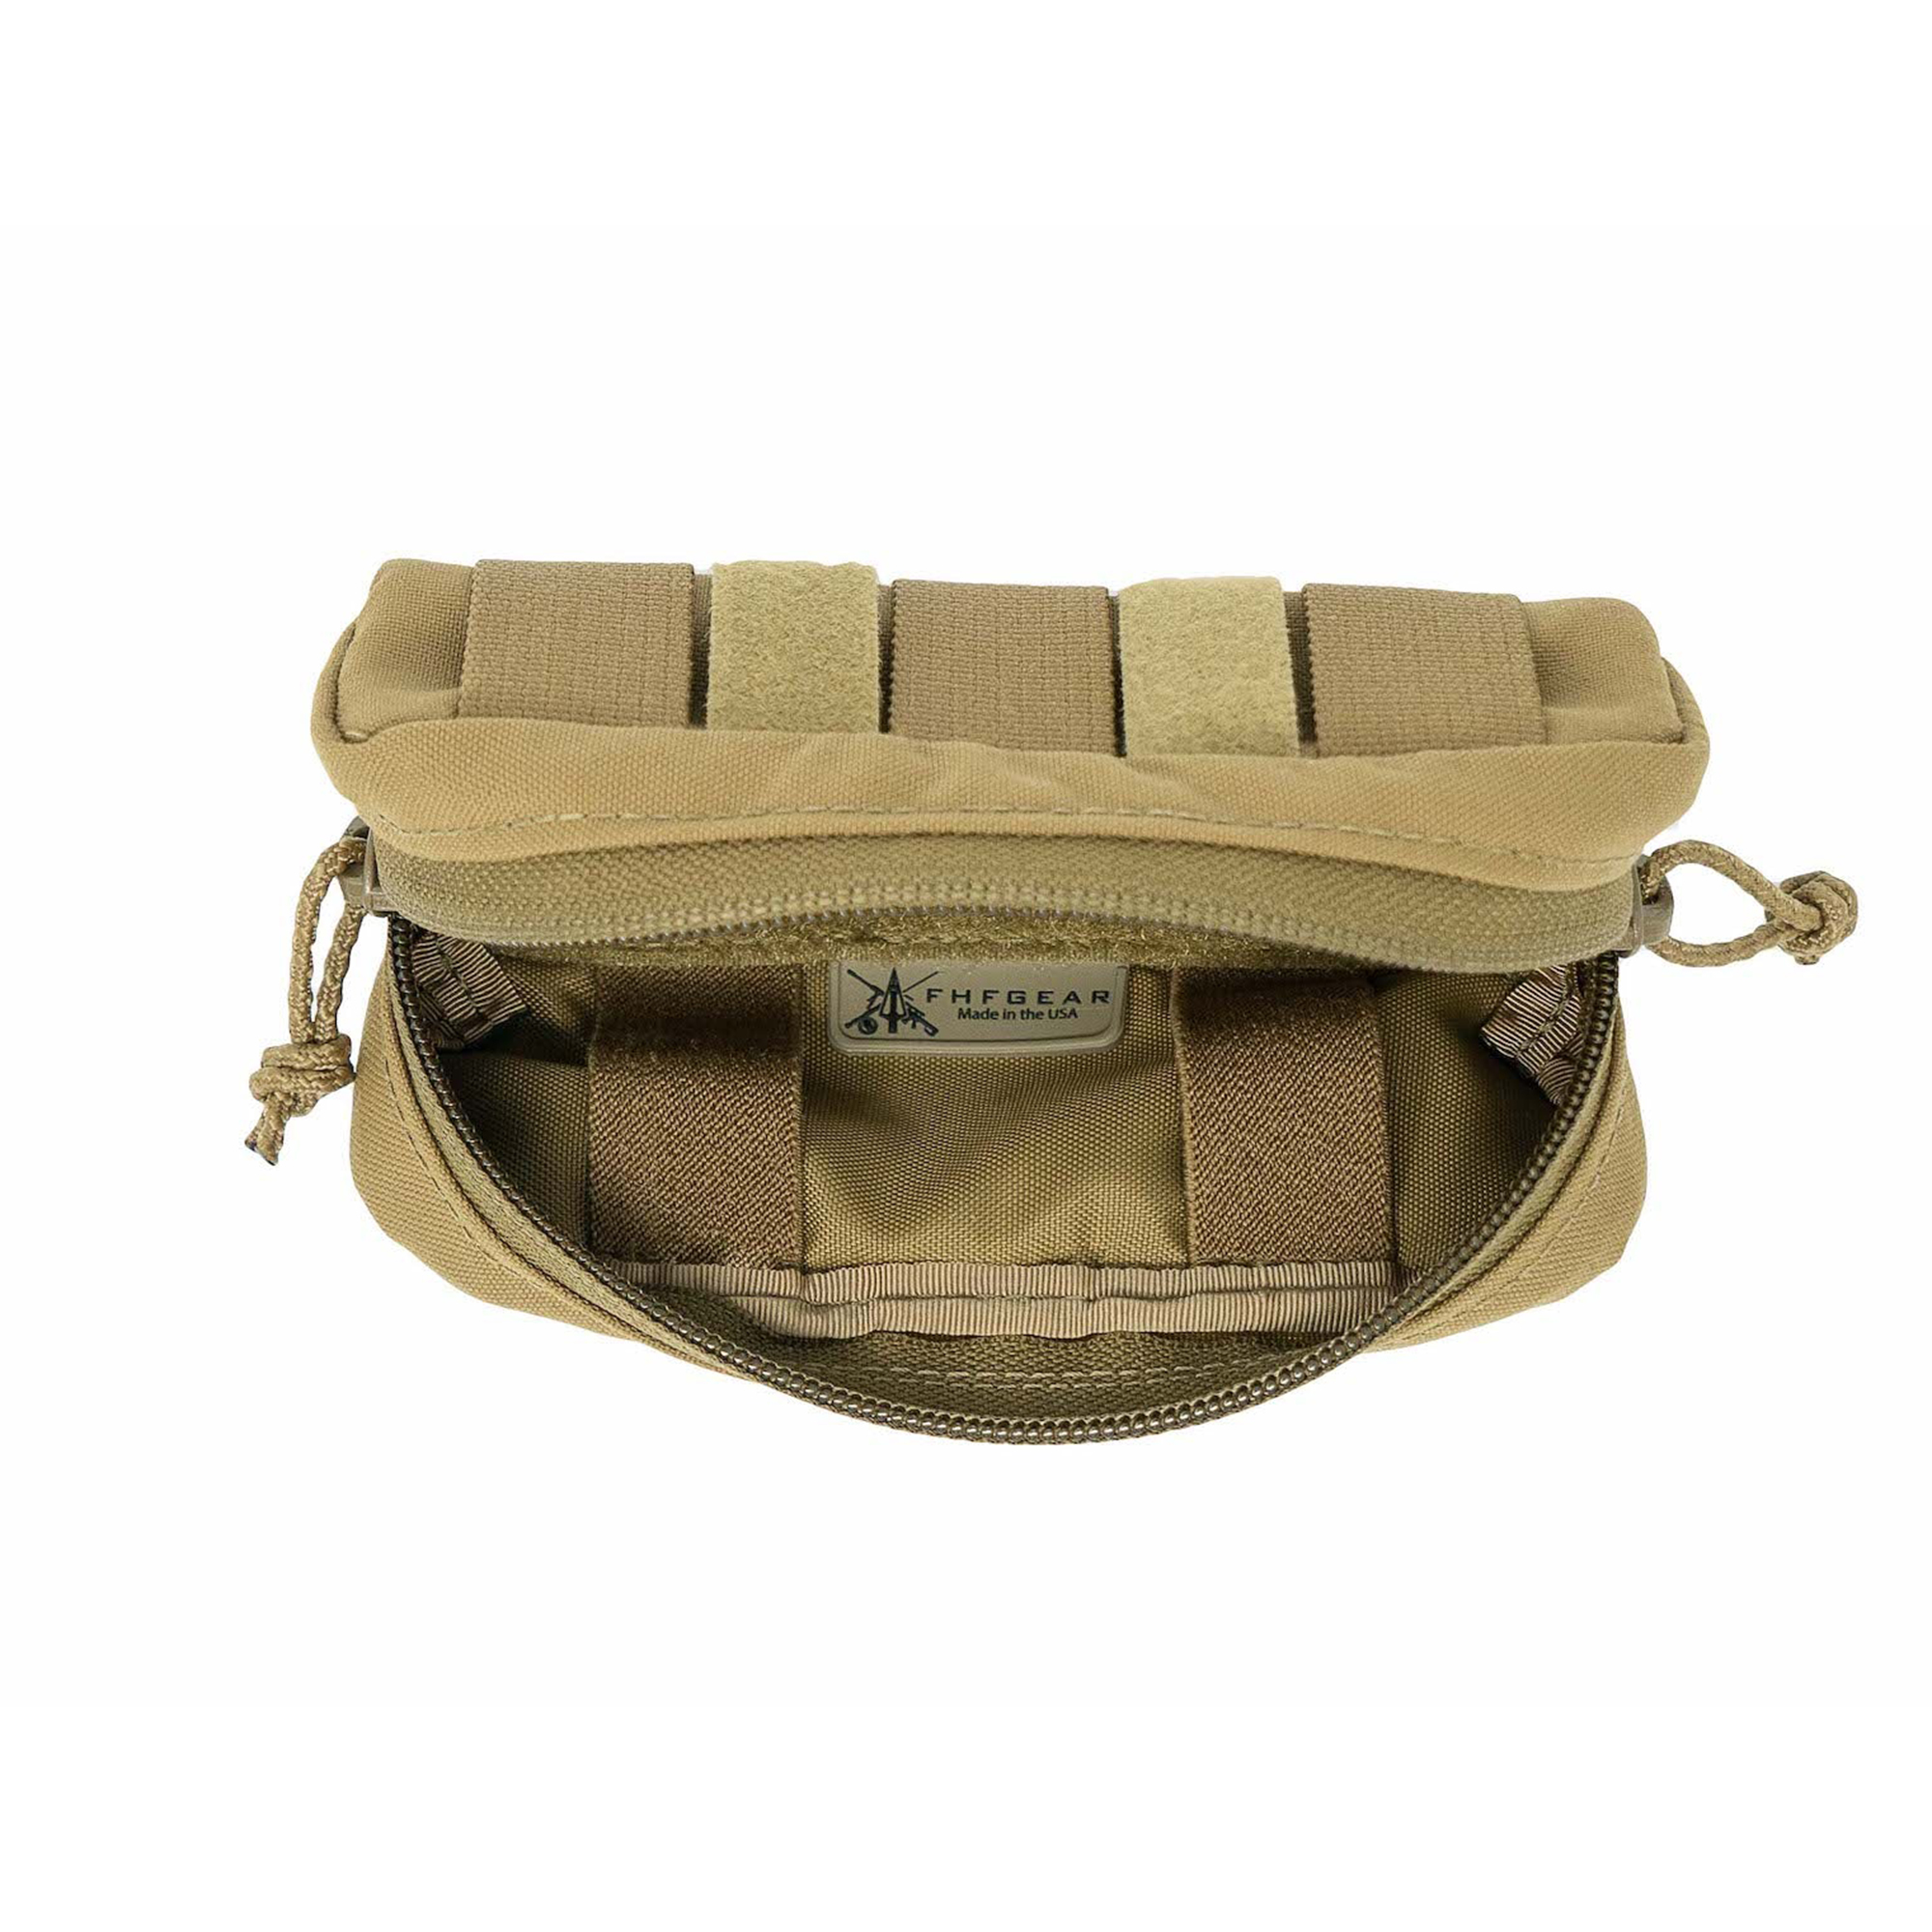 https://www.fhfgear.com/on/demandware.static/-/Sites-meateater-master/default/dw46324a85/general-purpose-pouch/general-purpose-pouch_global_top-open.jpg